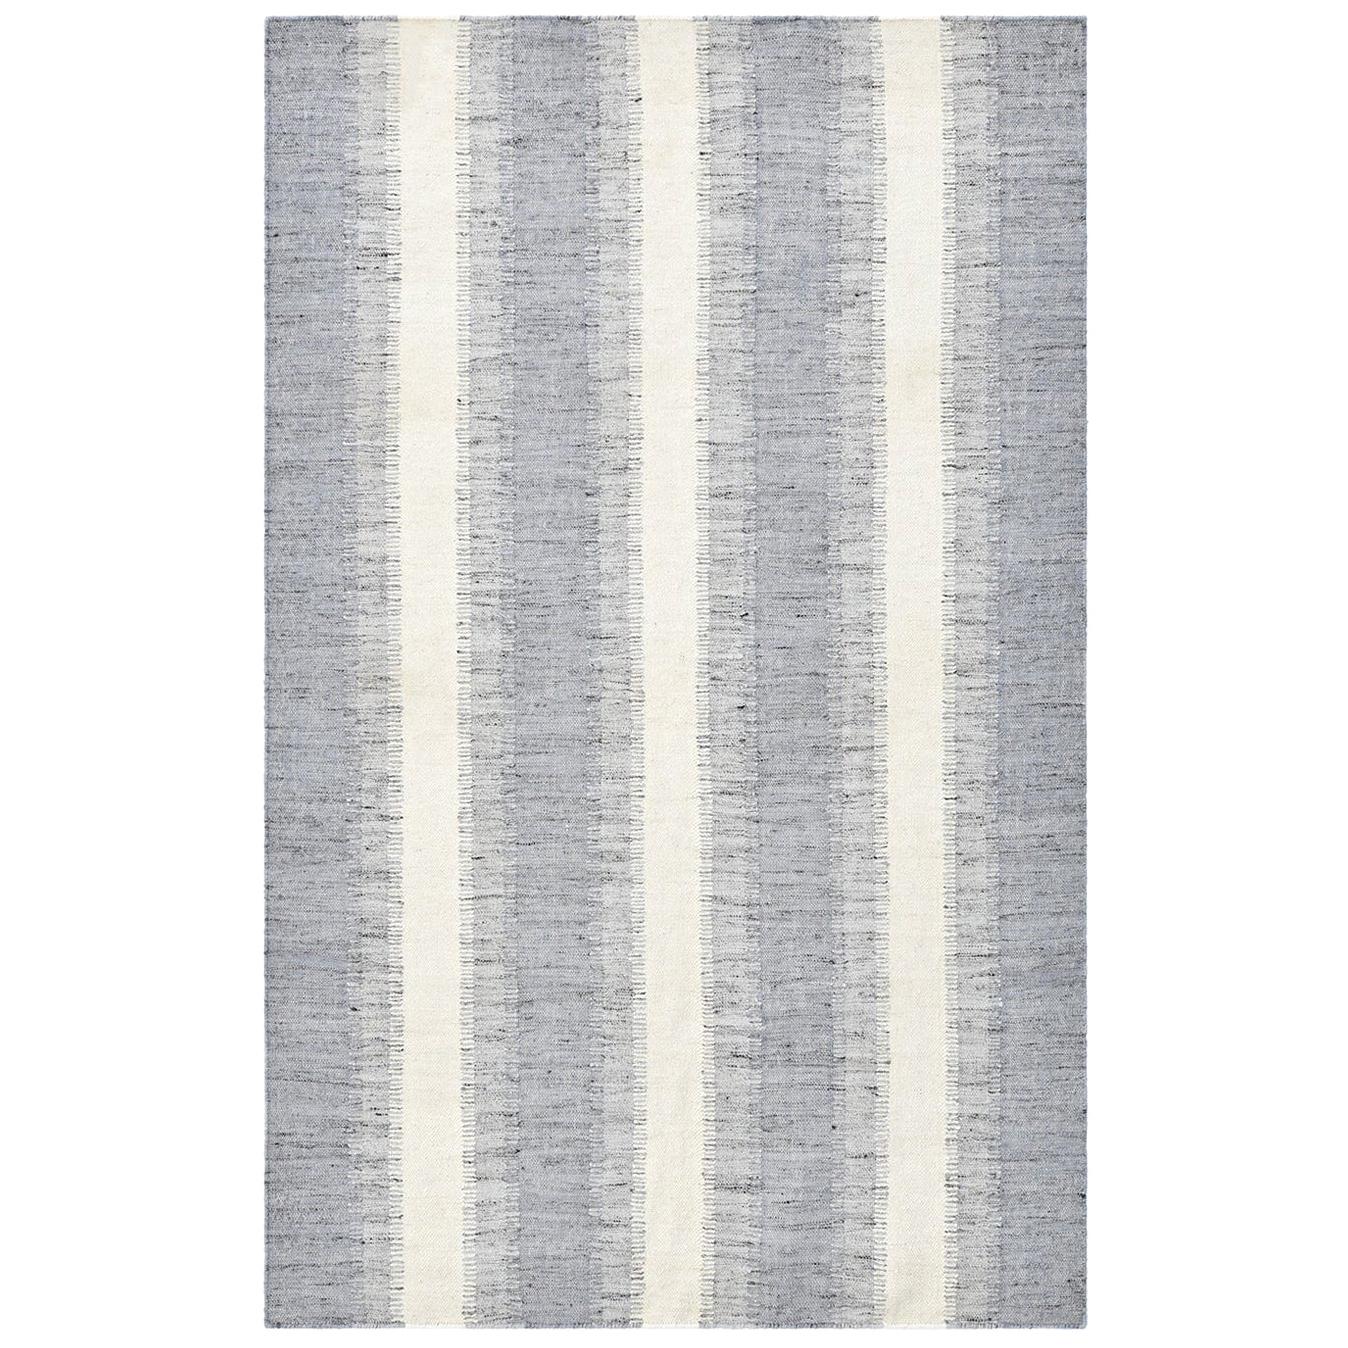 Indian Made Hand Woven Contemporary Flatweave Area Rug